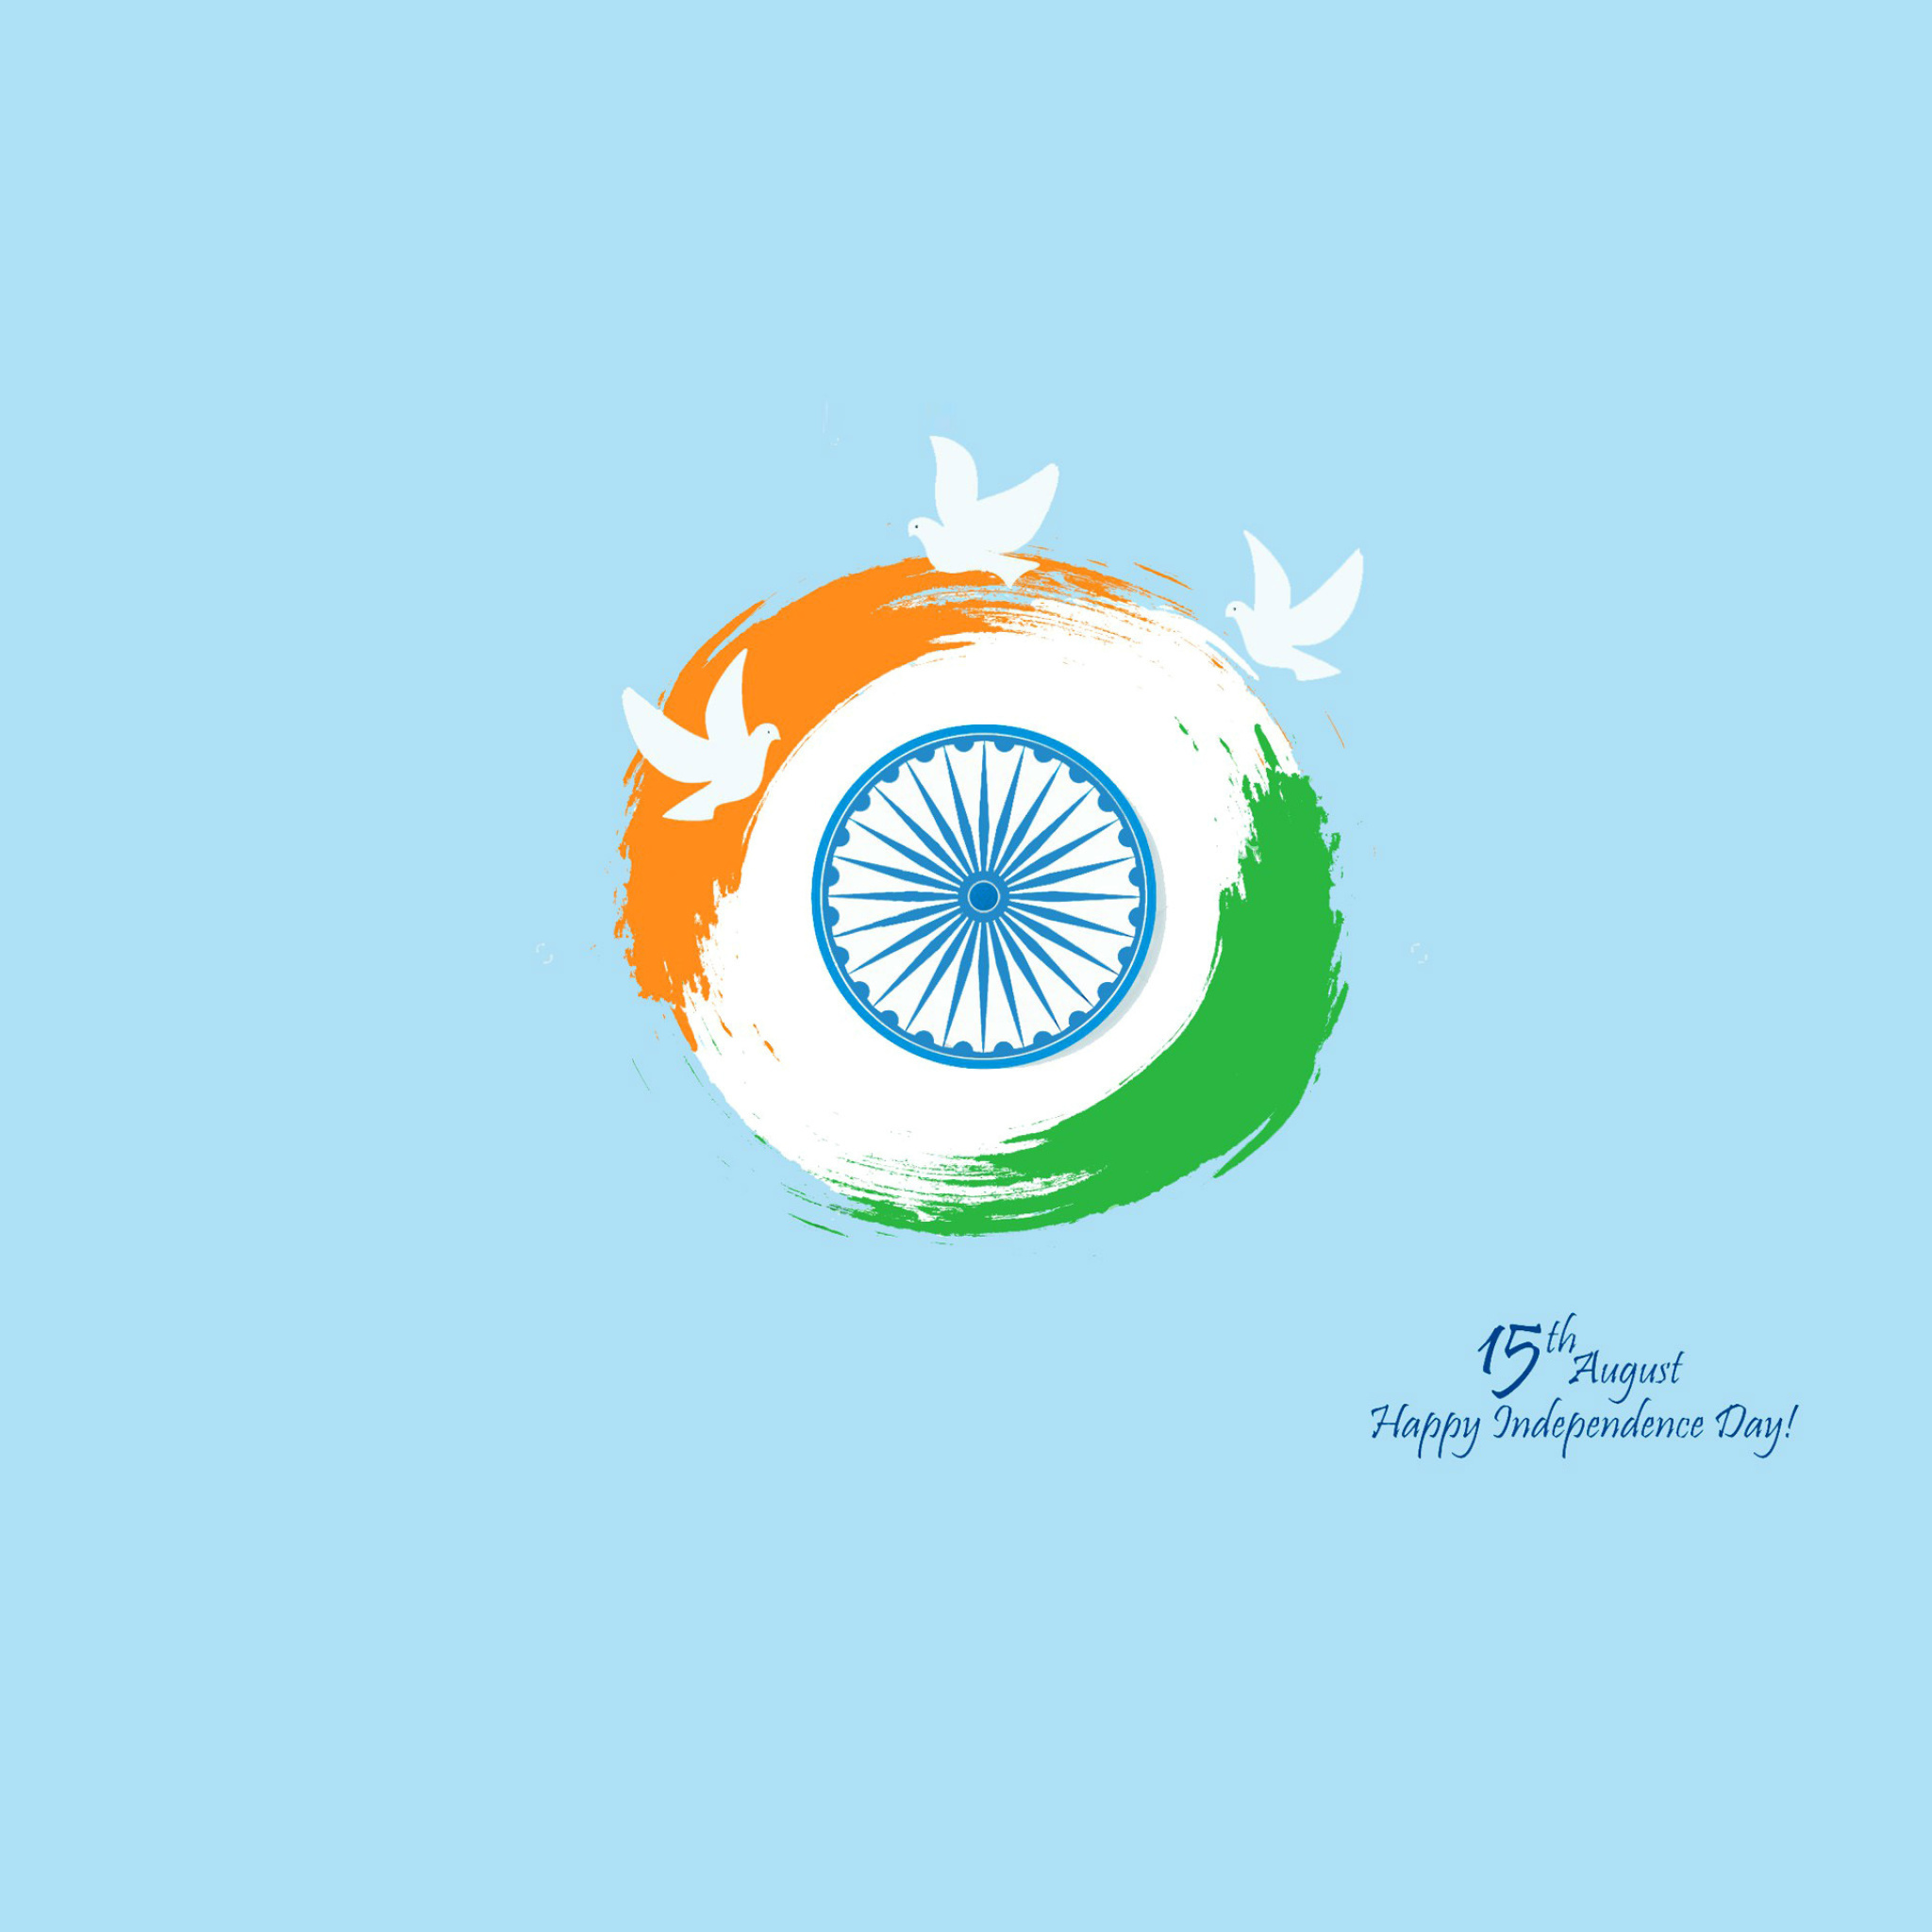 15th August Indian Independence Day screenshot #1 2048x2048